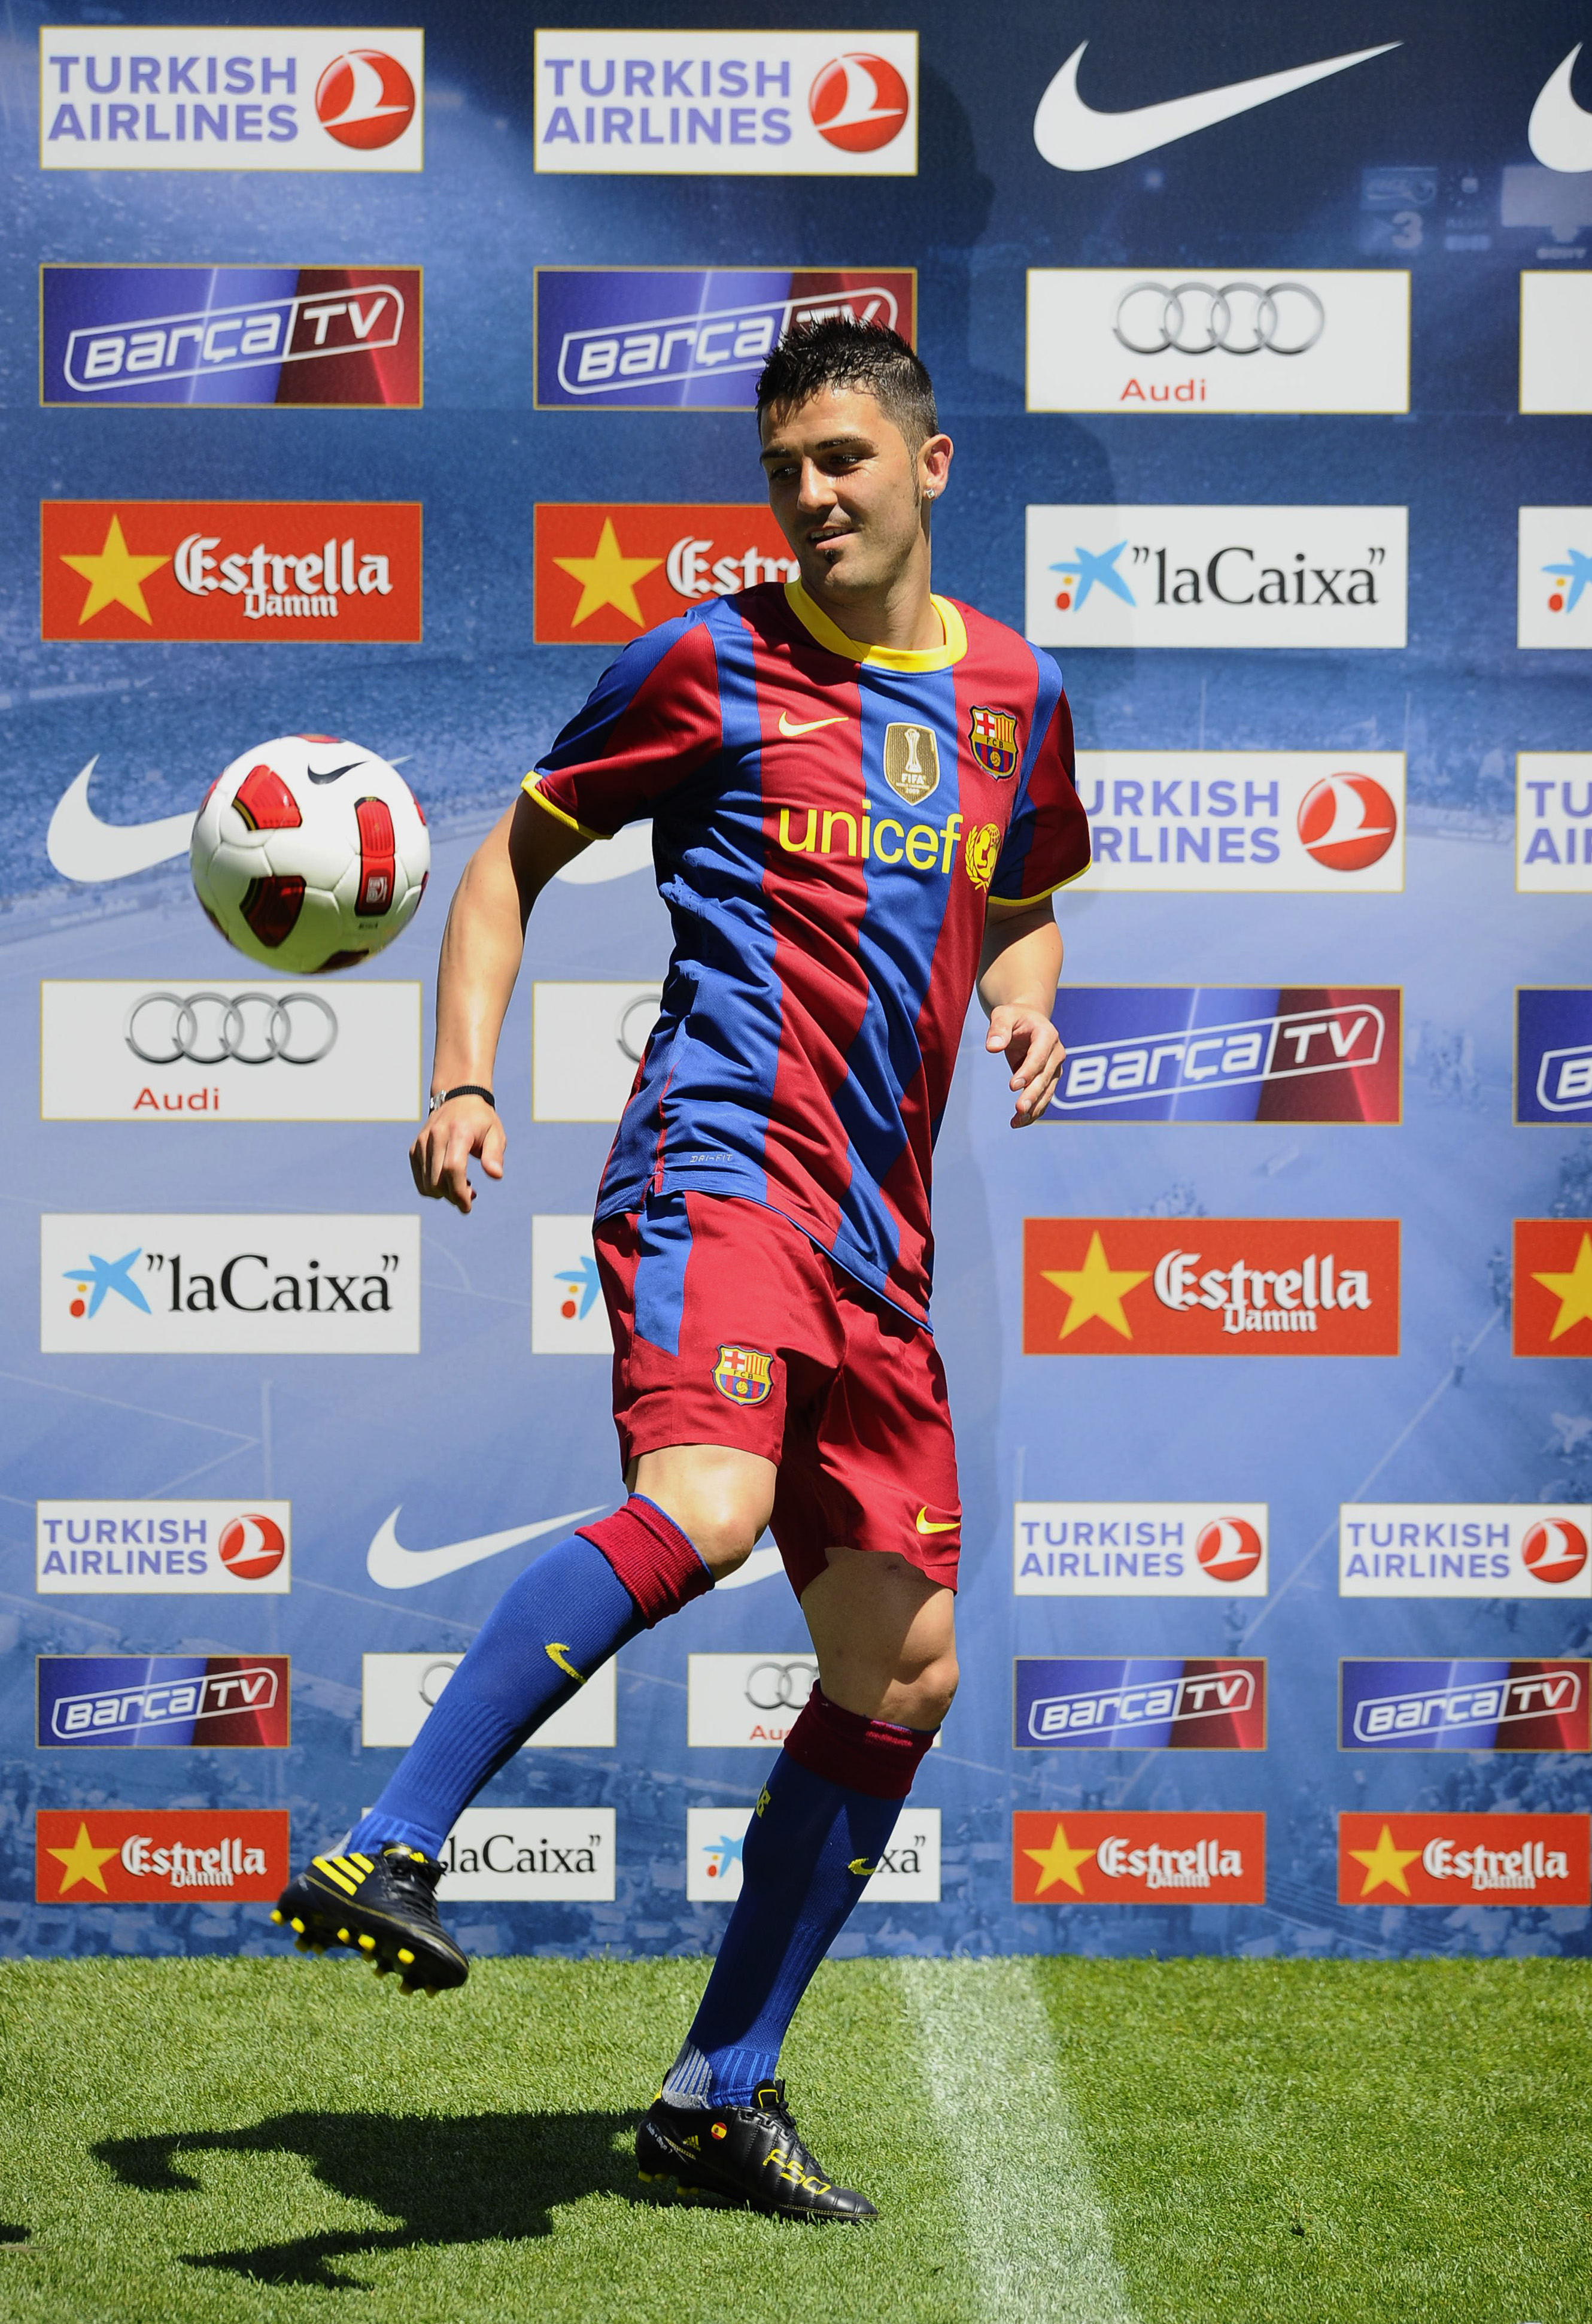 BARCELONA, SPAIN - MAY 21:  Barcelona's new signing David Villa juggles the ball as he poses for the cameras during his presentation at the Camp Nou stadium on May 21, 2010 in Barcelona, Spain.  (Photo by Siu Pong Wu Lau/Getty Images)